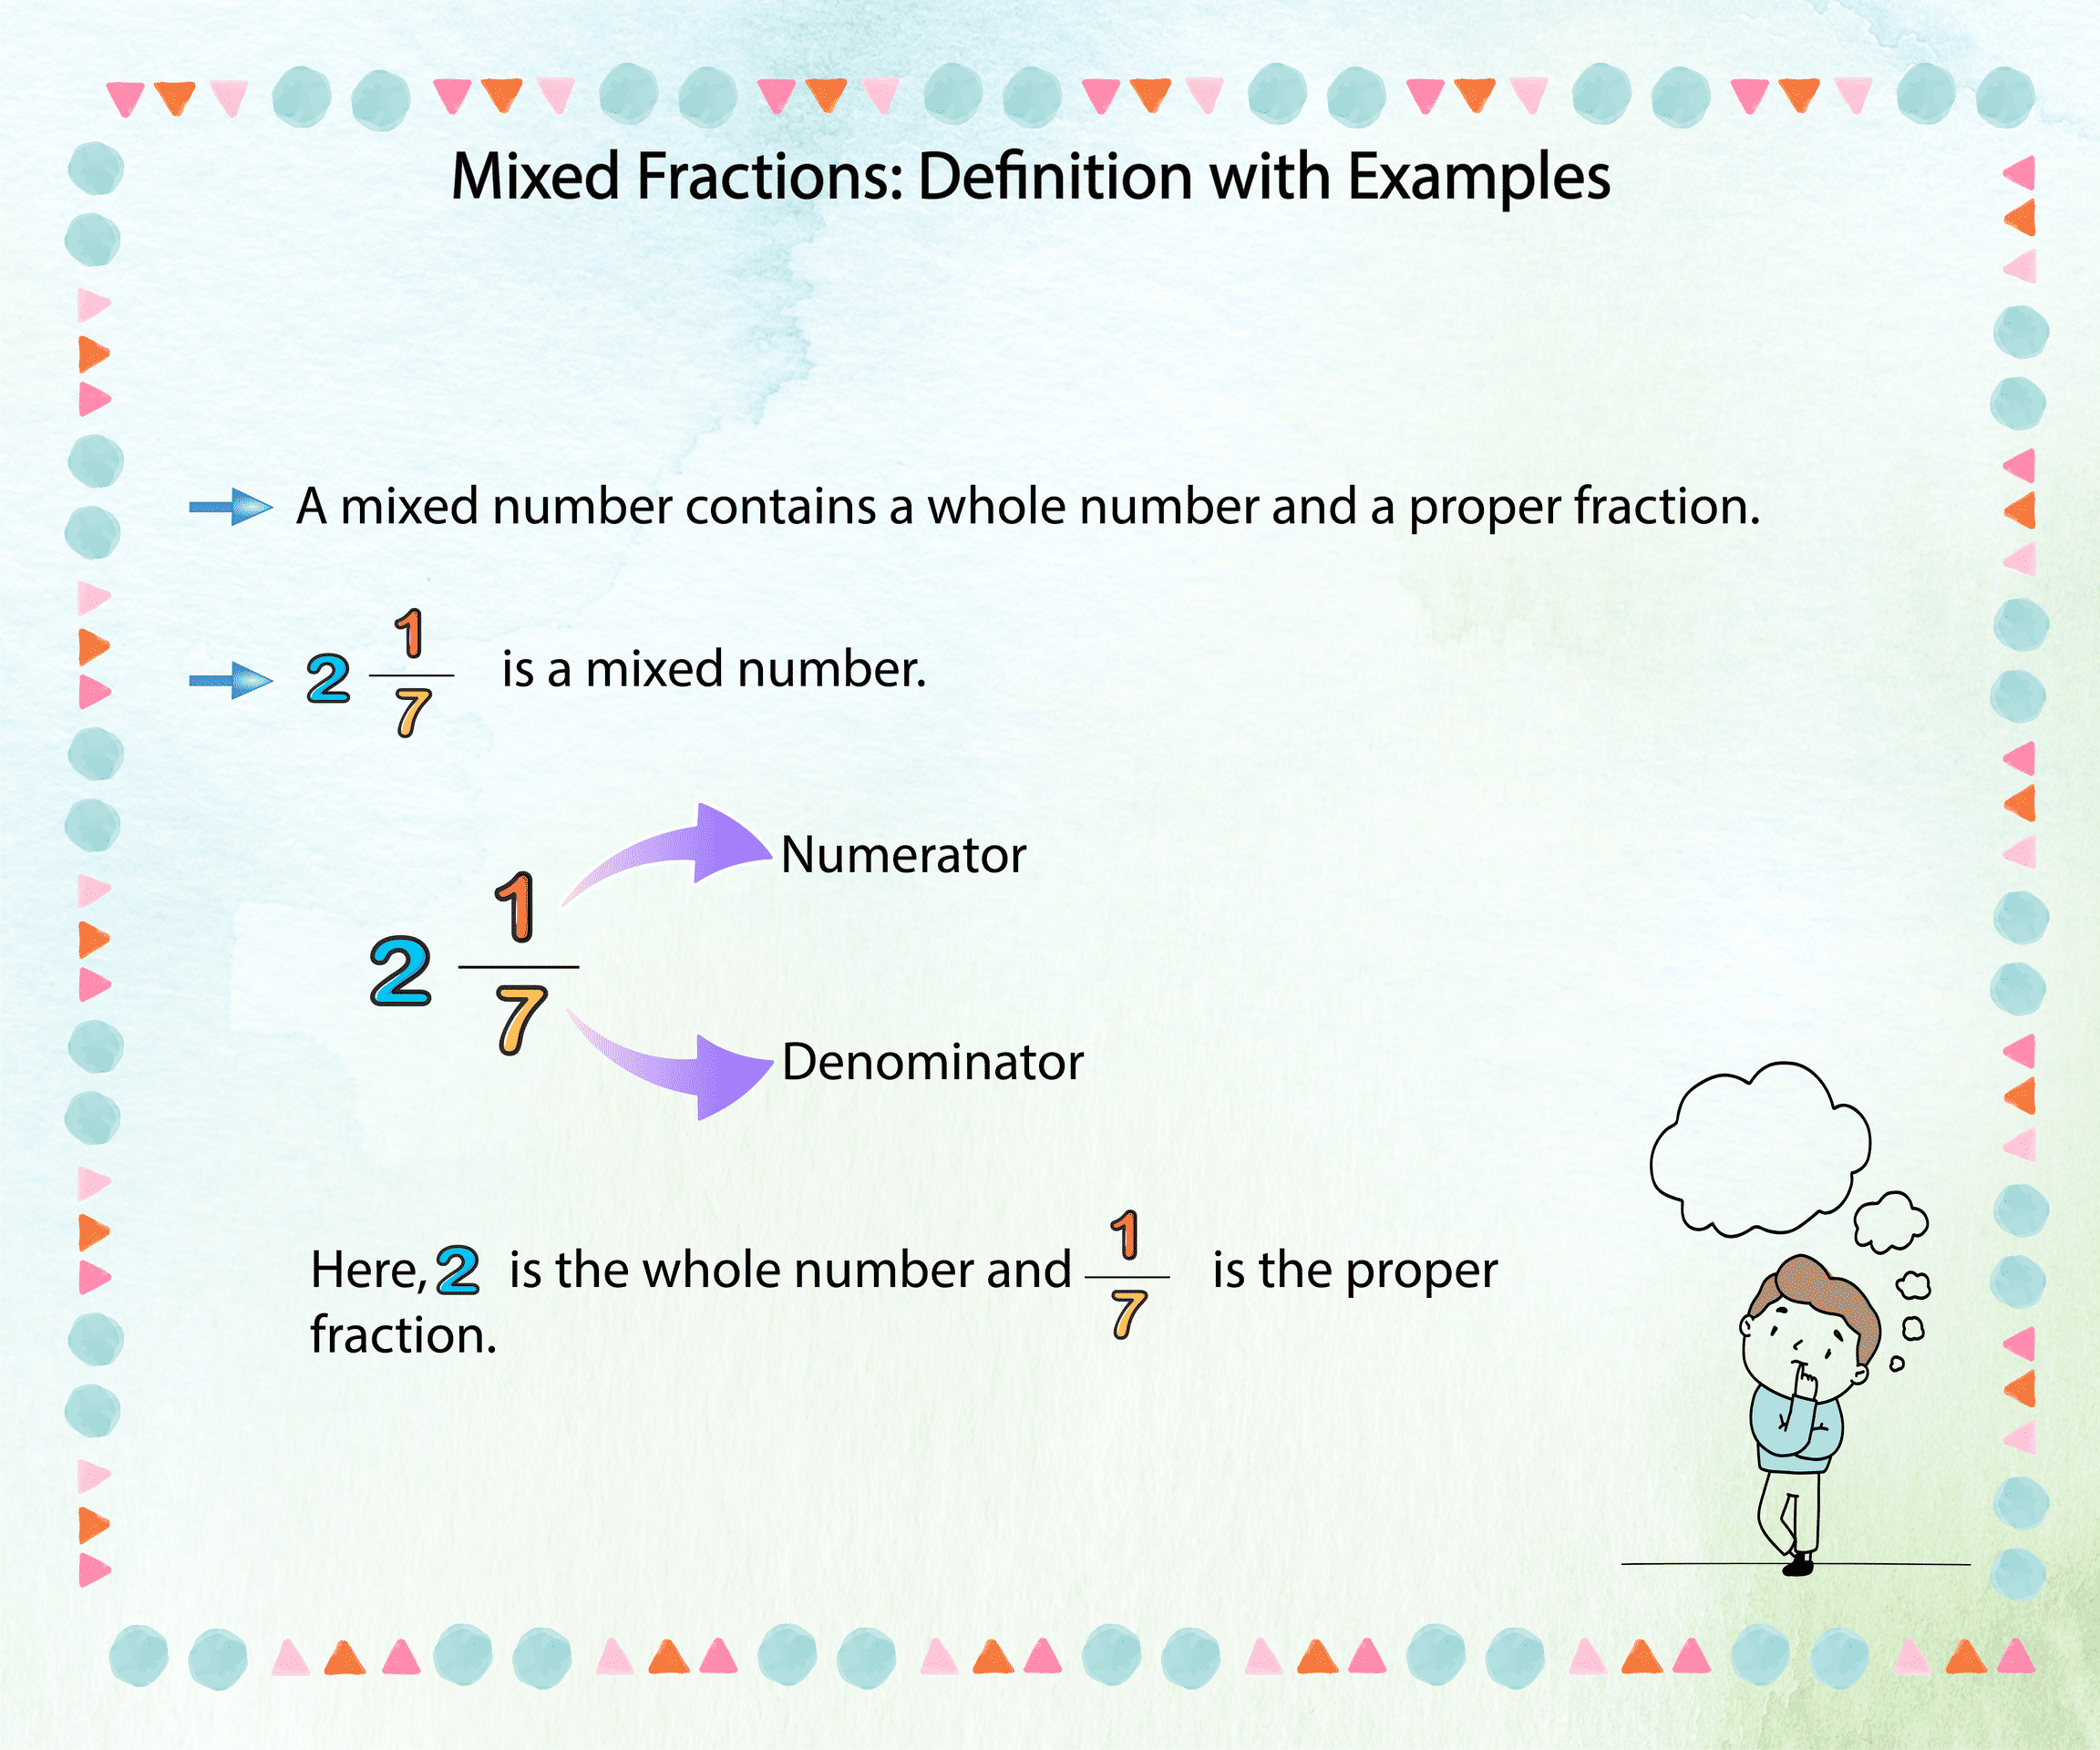 Explaining Mixed Fractions with Examples